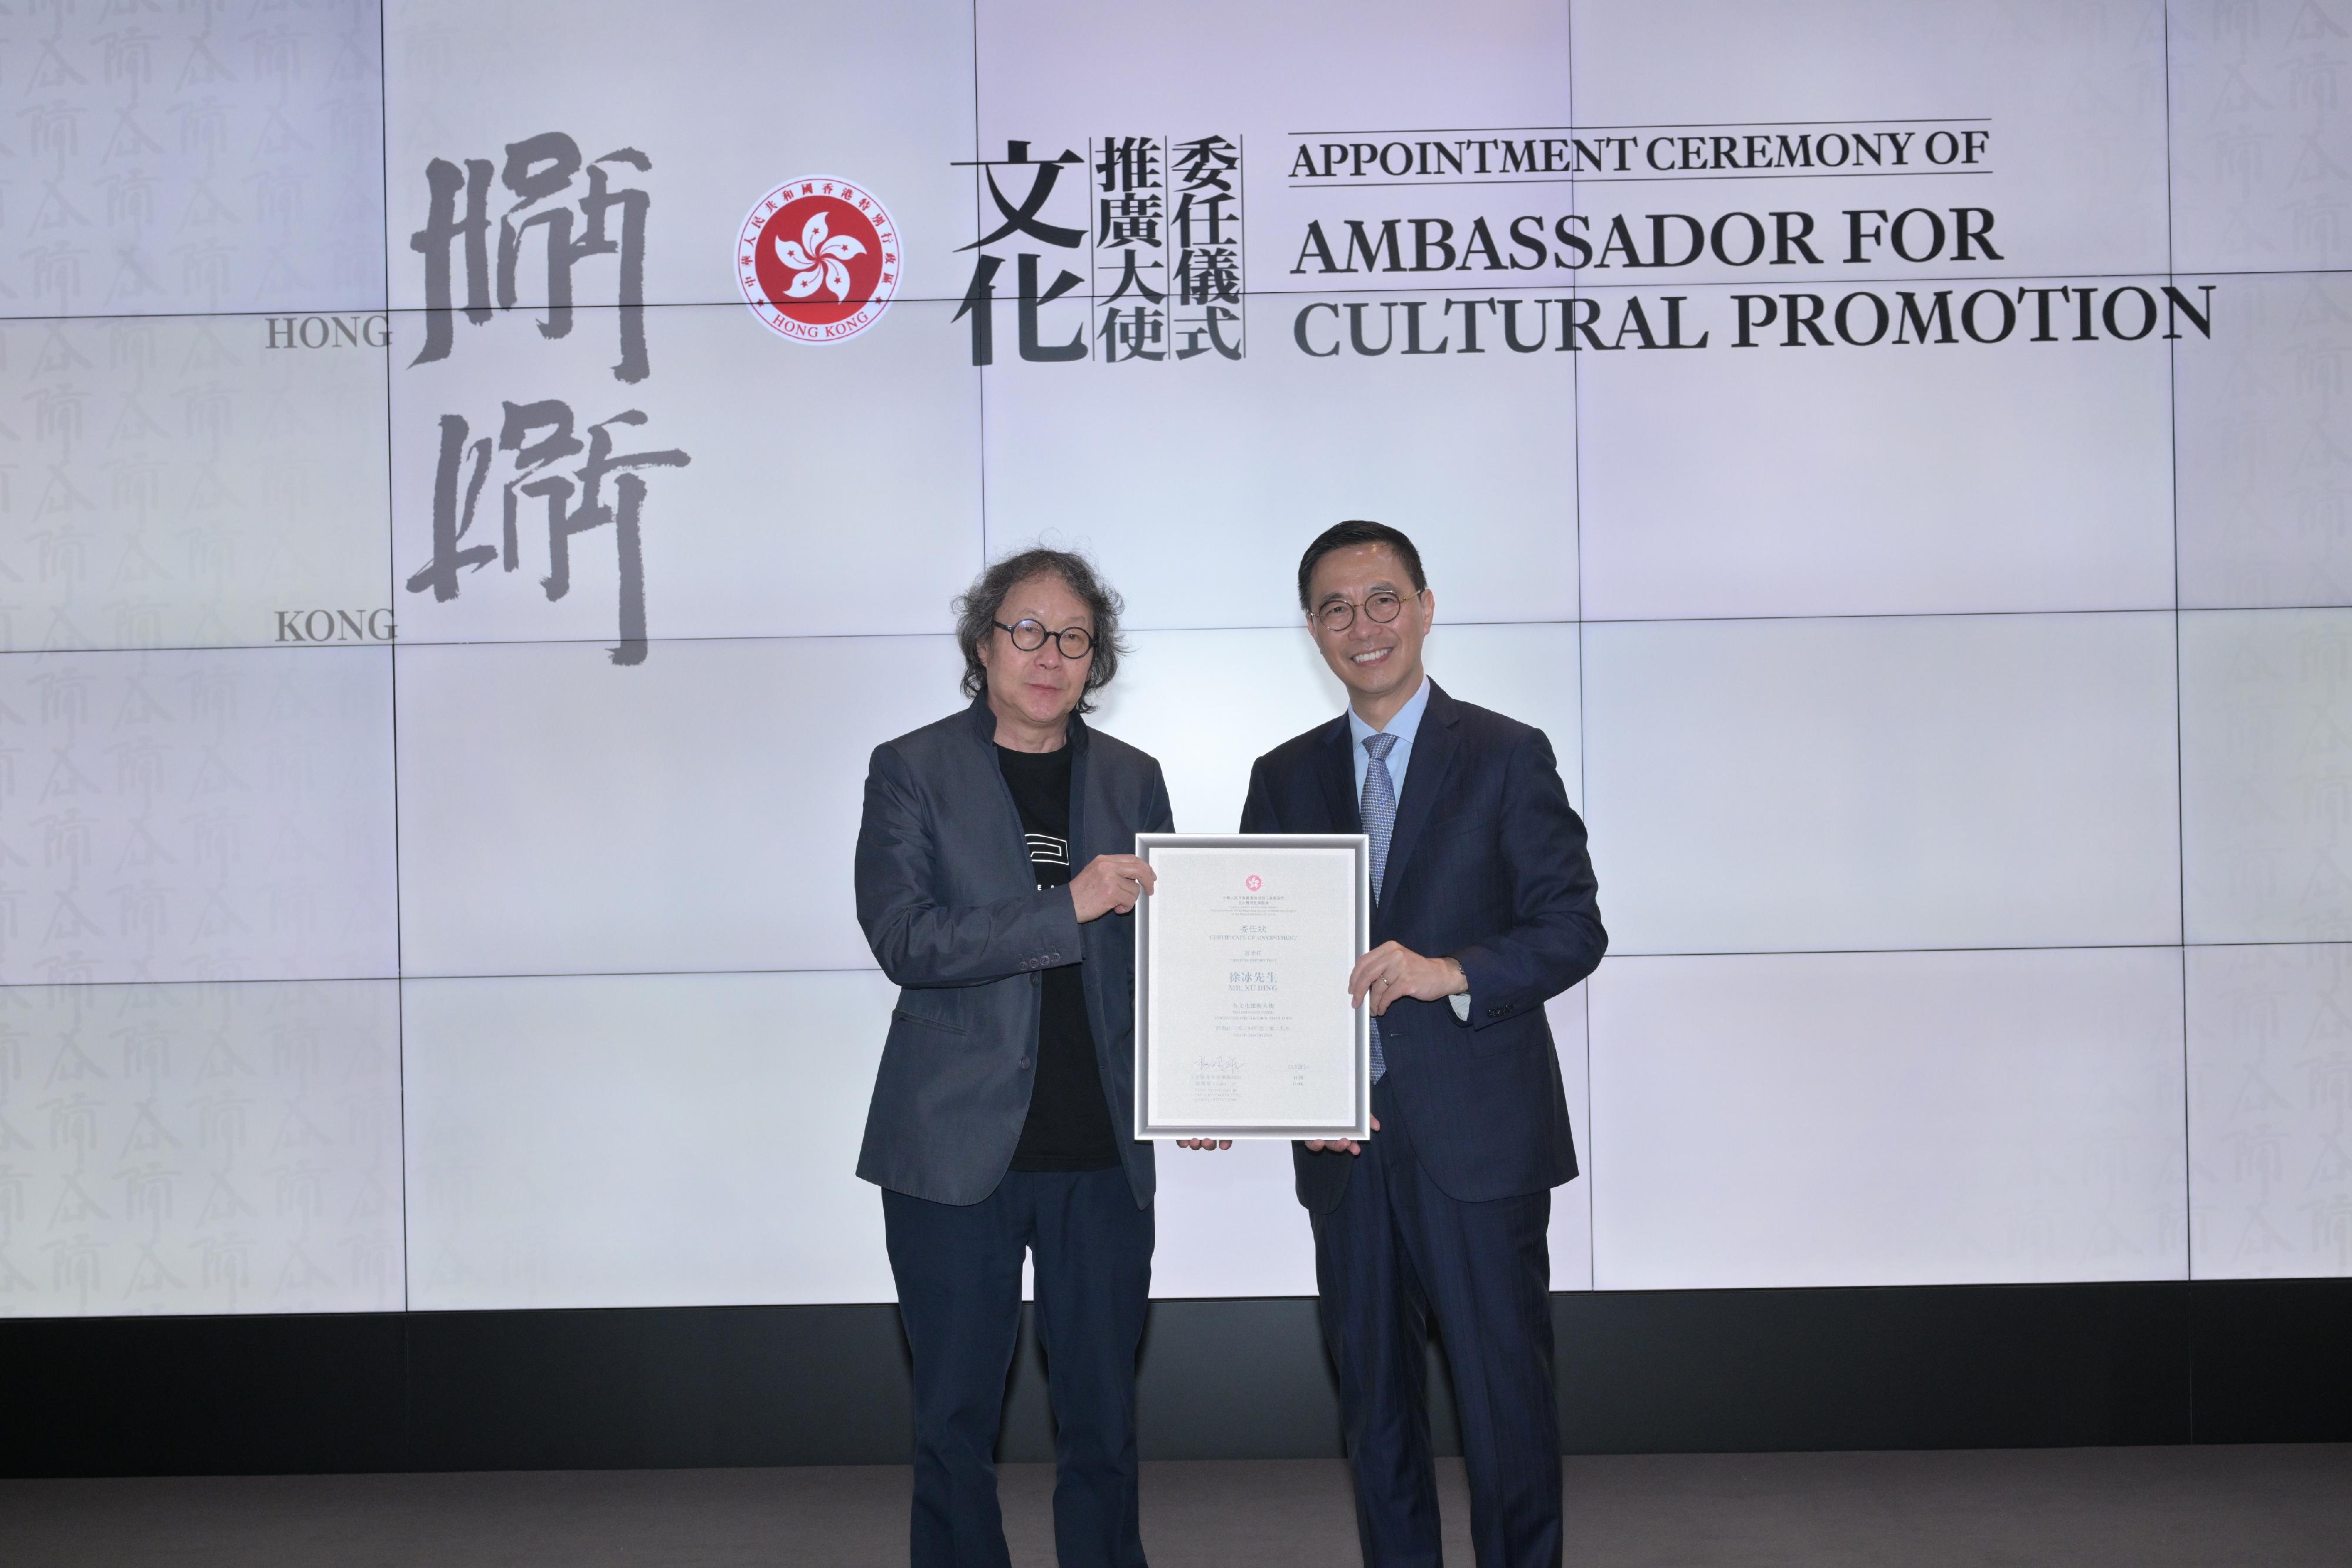 The Government announced today (March 28) that the Secretary for Culture, Sports and Tourism, Mr Kevin Yeung, has appointed Xu Bing as the Ambassador for Cultural Promotion. Picture shows Mr Yeung (right) presenting the certificate of appointment of "Ambassador for Cultural Promotion" to Xu (left).